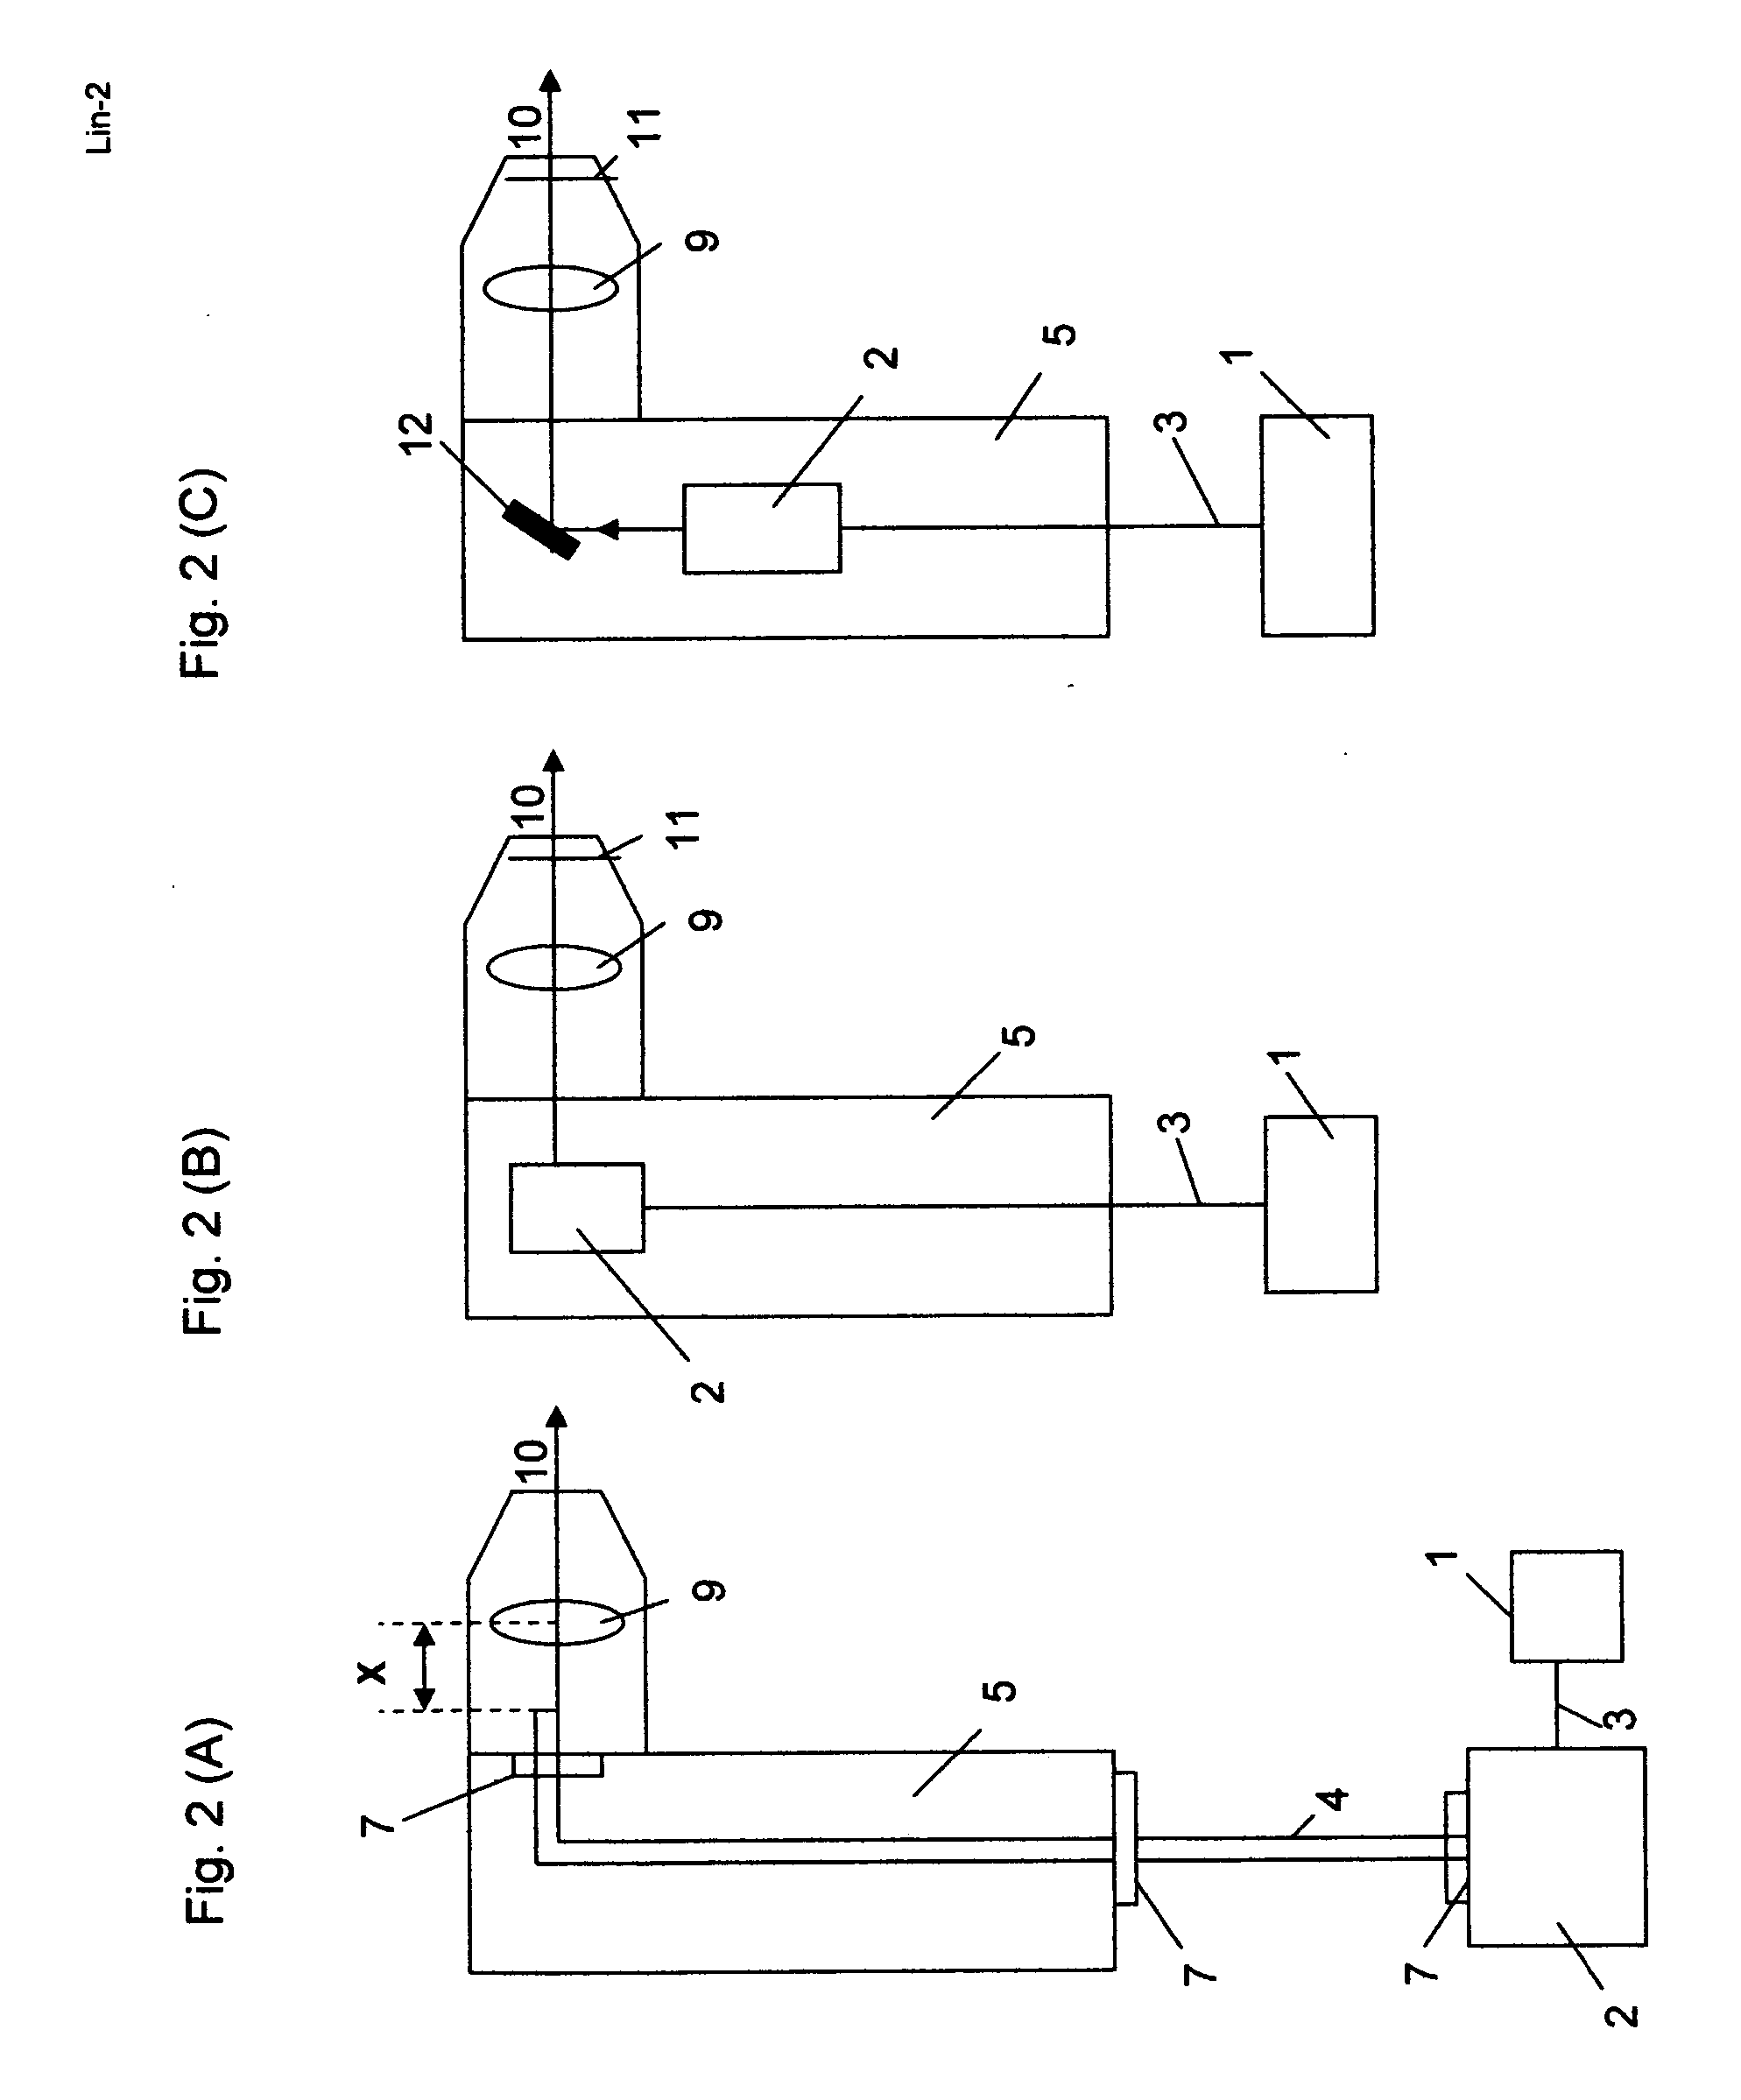 Compact laser device and method for hair removal